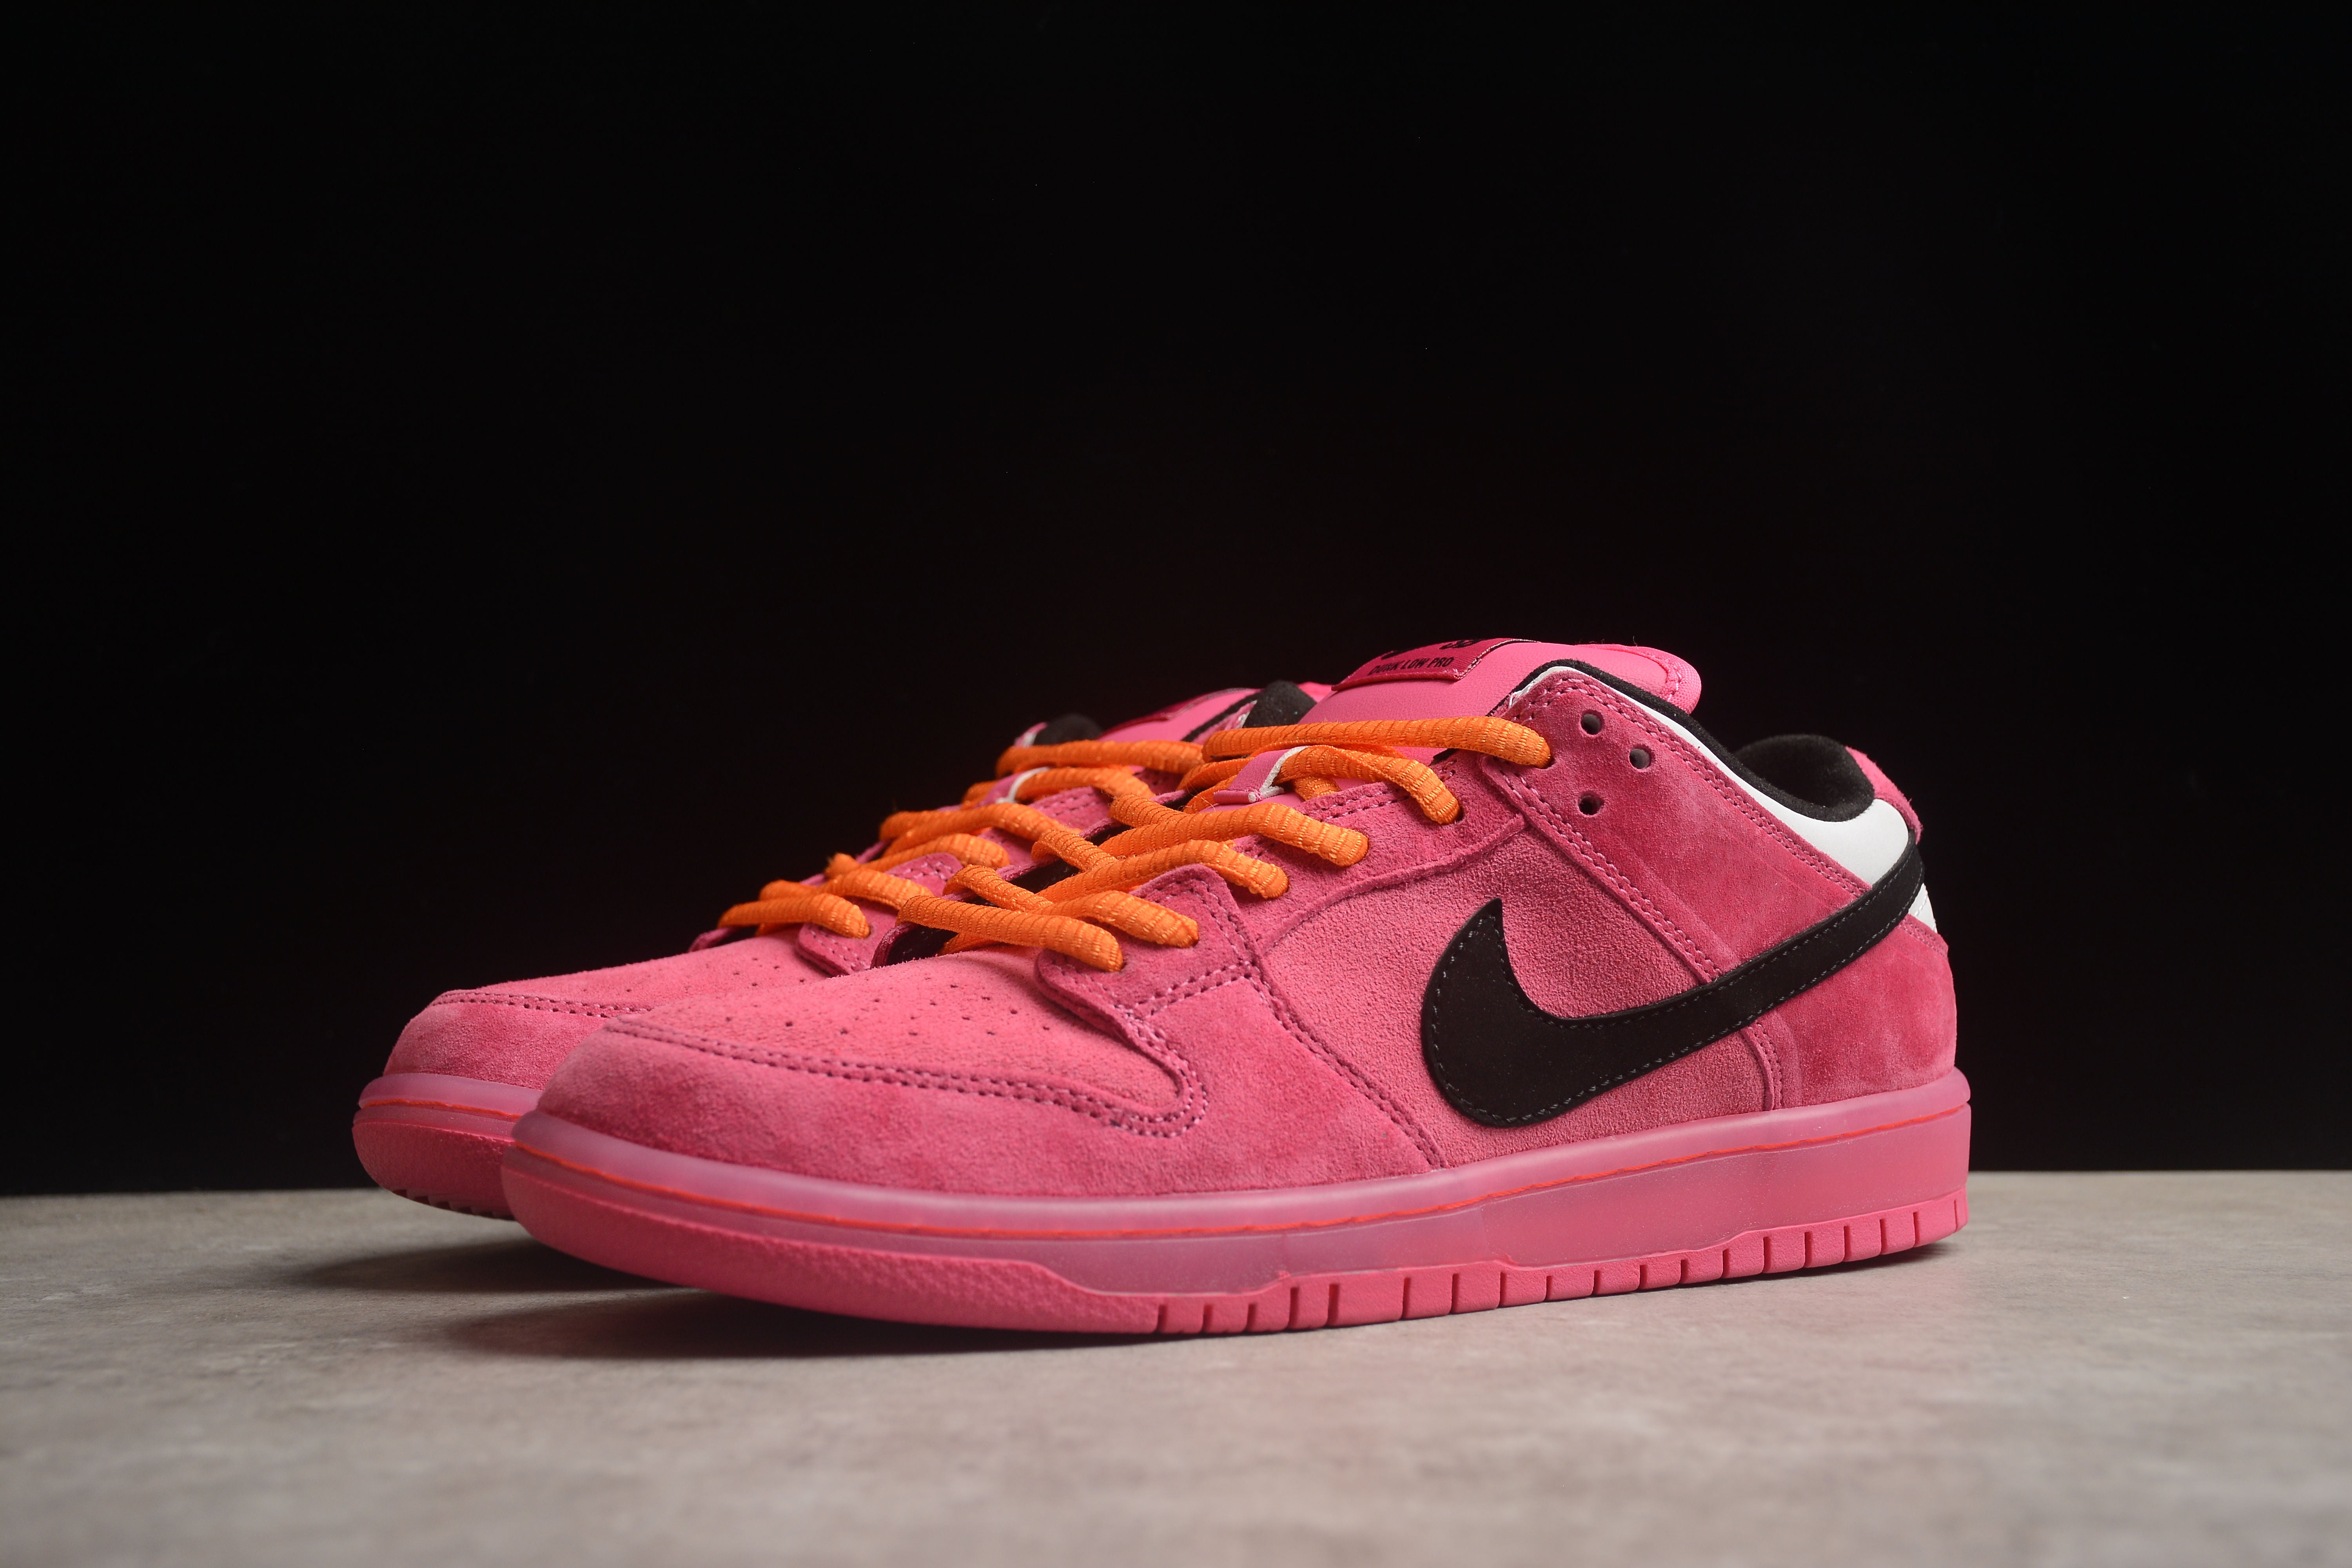 Nike SB dunk low cartoon power little police pink shoes